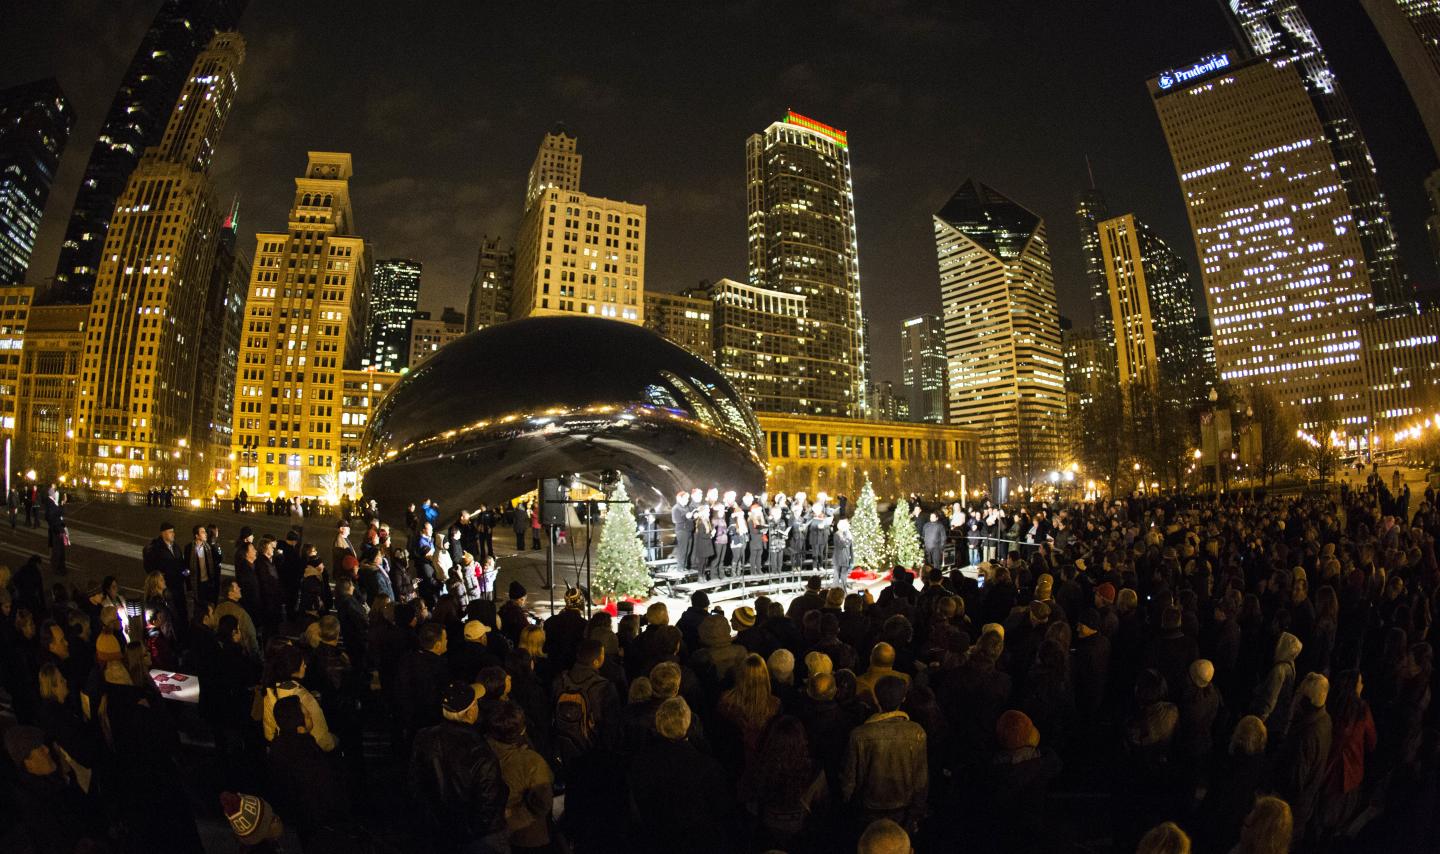 13 Spots for Christmas Lights in Chicago Holiday Displays & Events